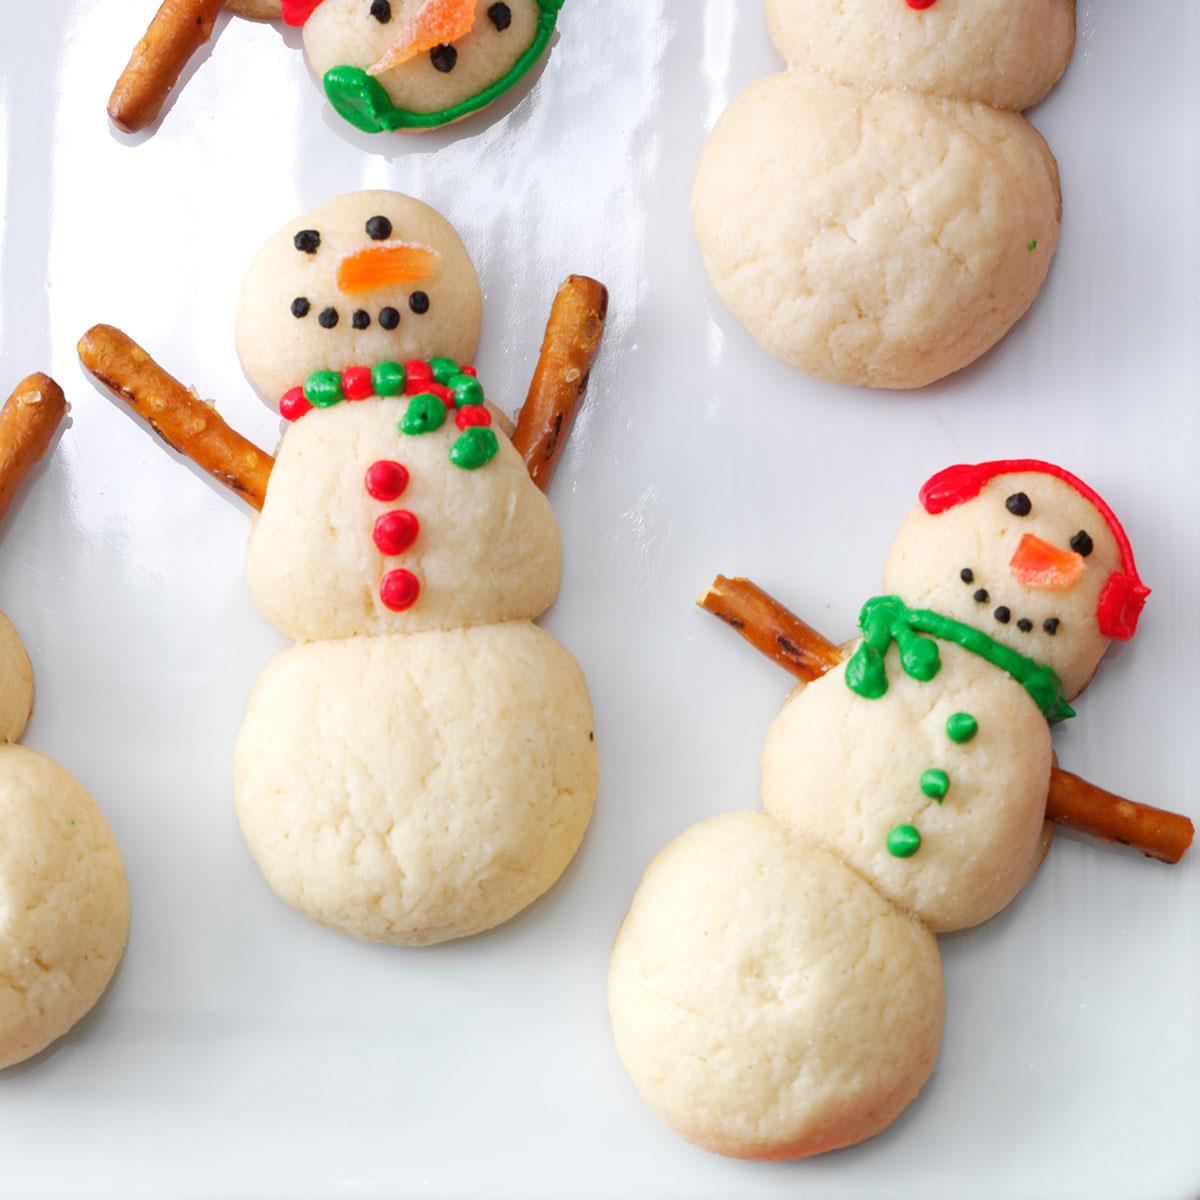 Snowman Christmas Cookies Recipe: How to Make It